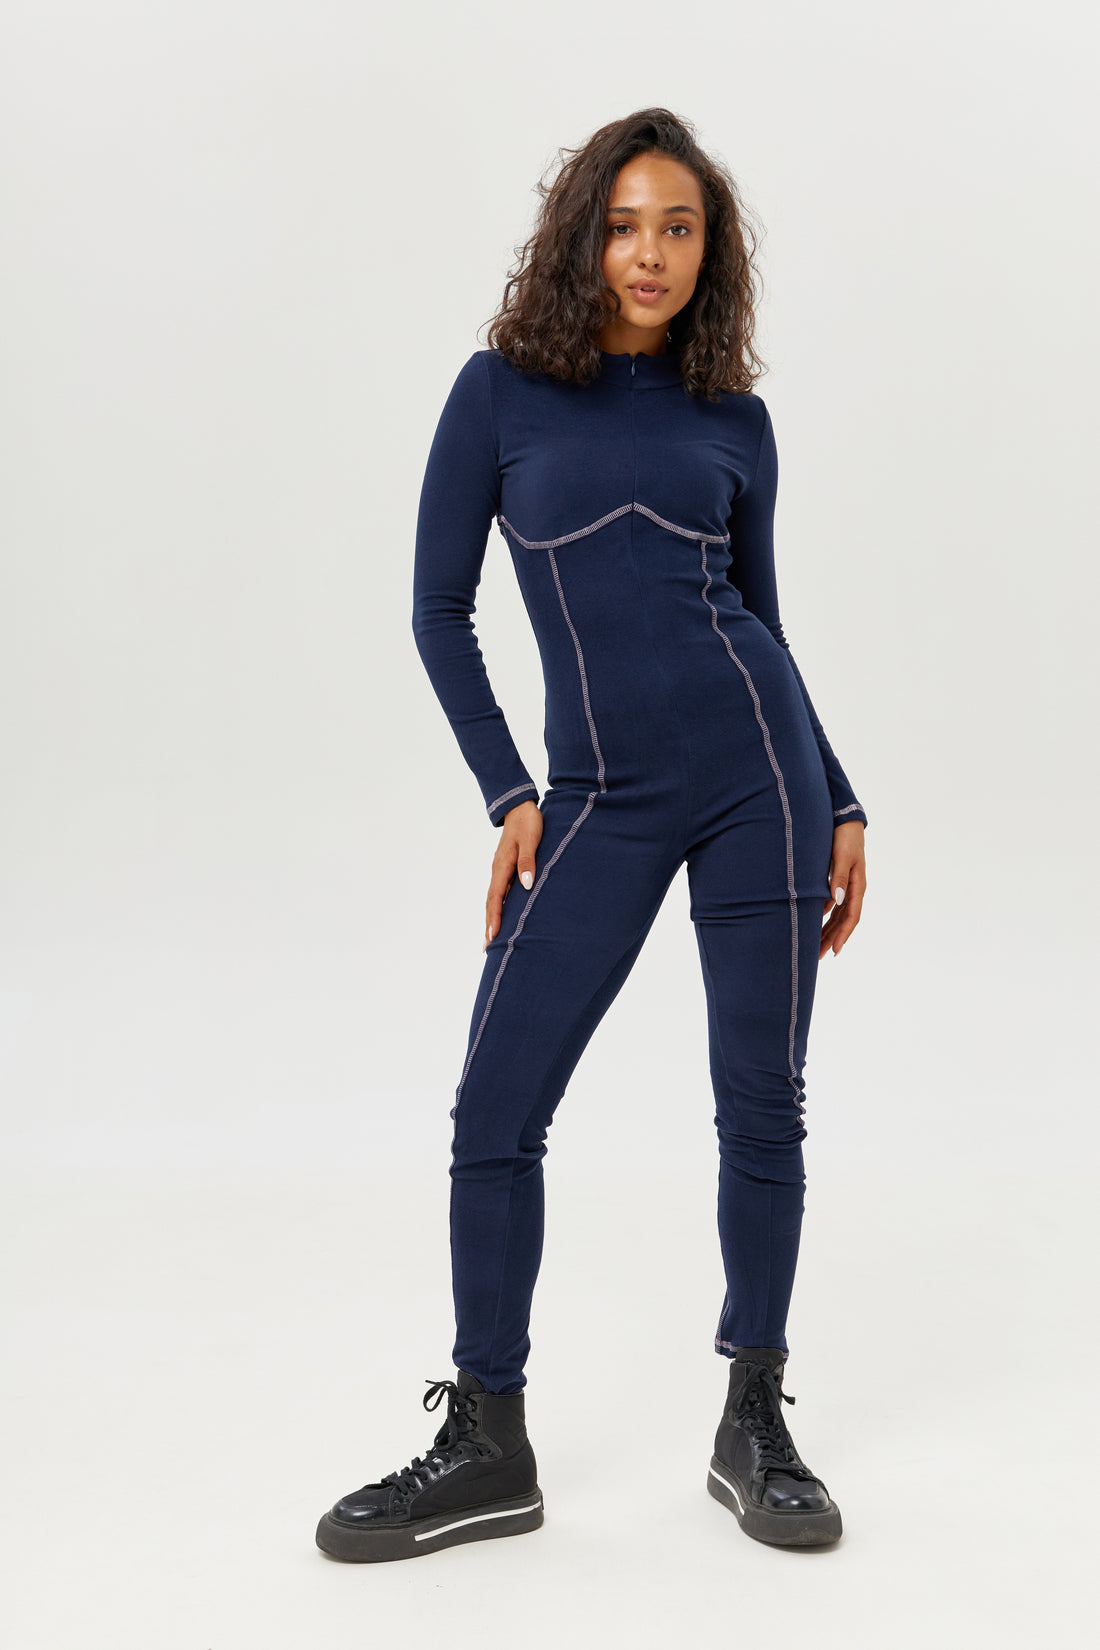 Base layer black jumpsuit - Thermal underwear navy blue one piece - Long johns for women